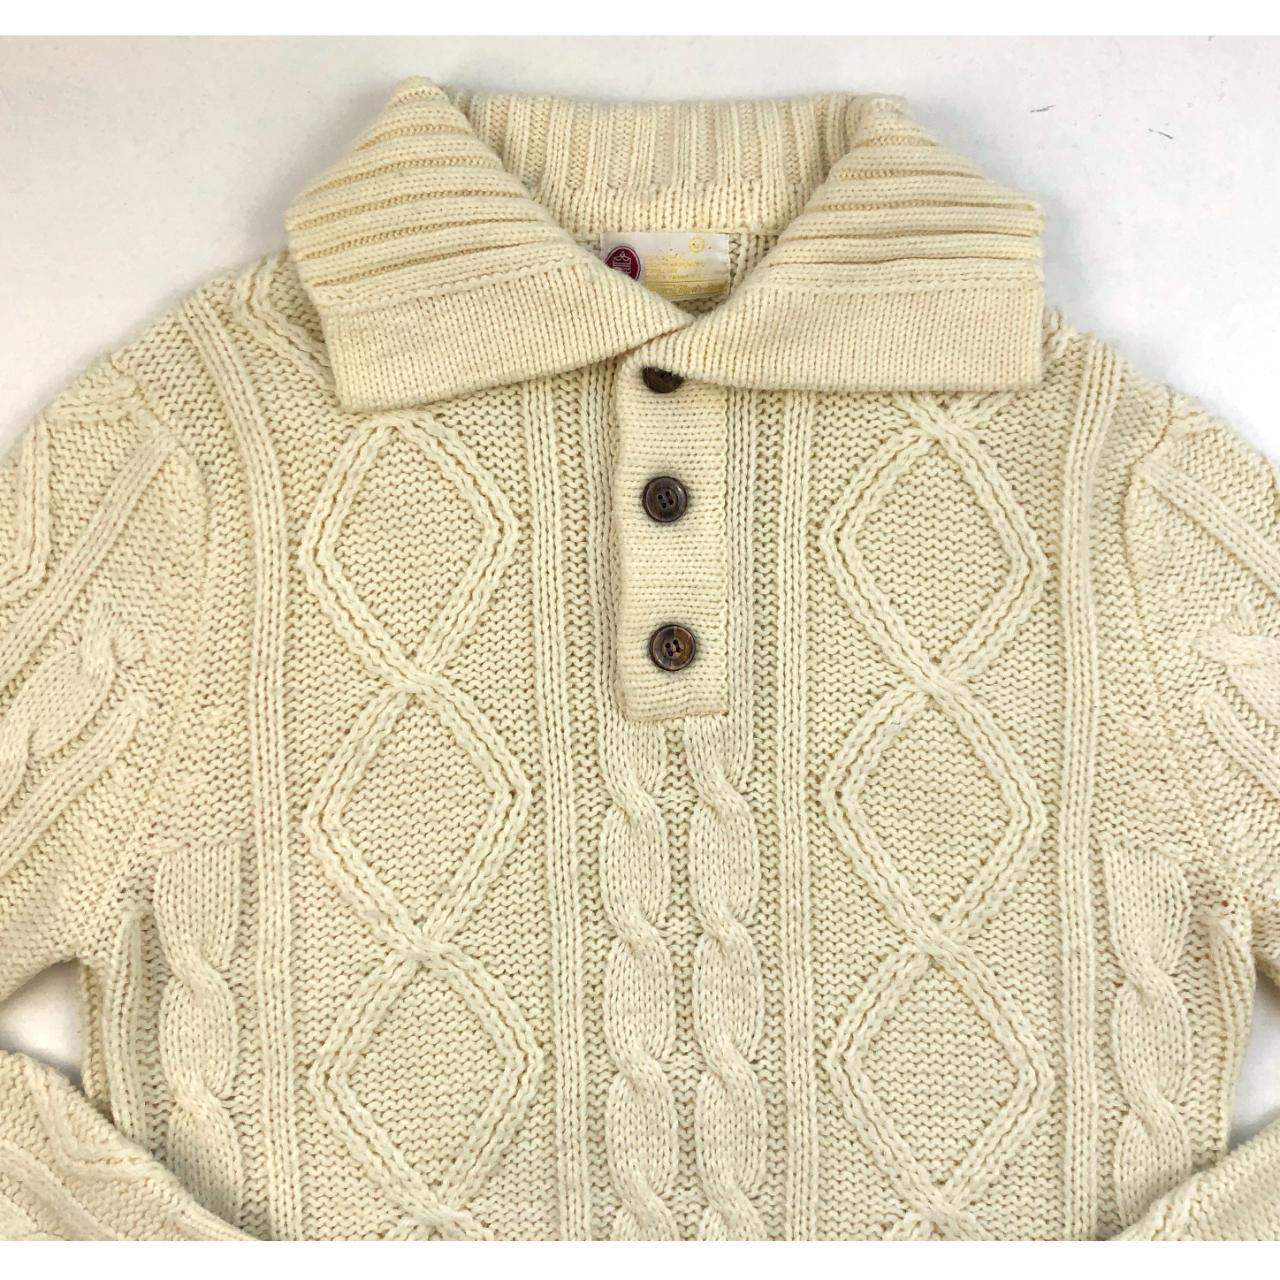 Chunky knit acrylic sweater with cable knit patterns... - Depop